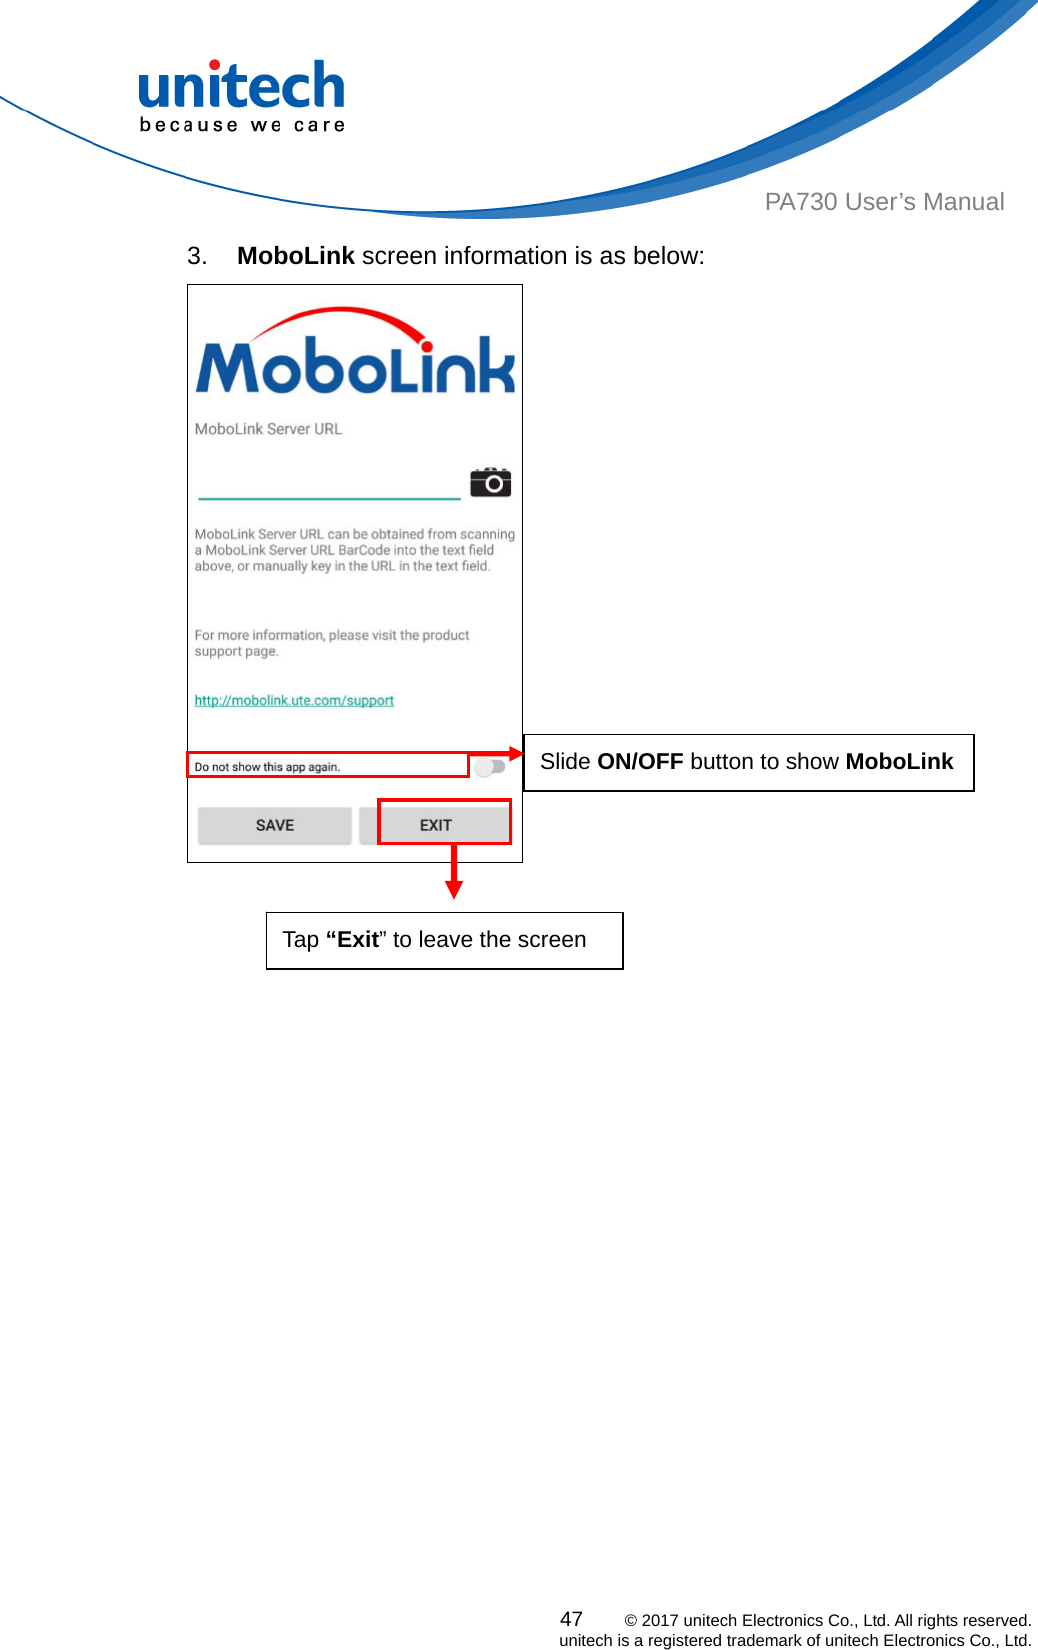  PA730 User’s Manual 3.  MoboLink screen information is as below: Slide ON/OFF button to show MoboLink  47    © 2017 unitech Electronics Co., Ltd. All rights reserved.   unitech is a registered trademark of unitech Electronics Co., Ltd.    Tap “Exit” to leave the screen  